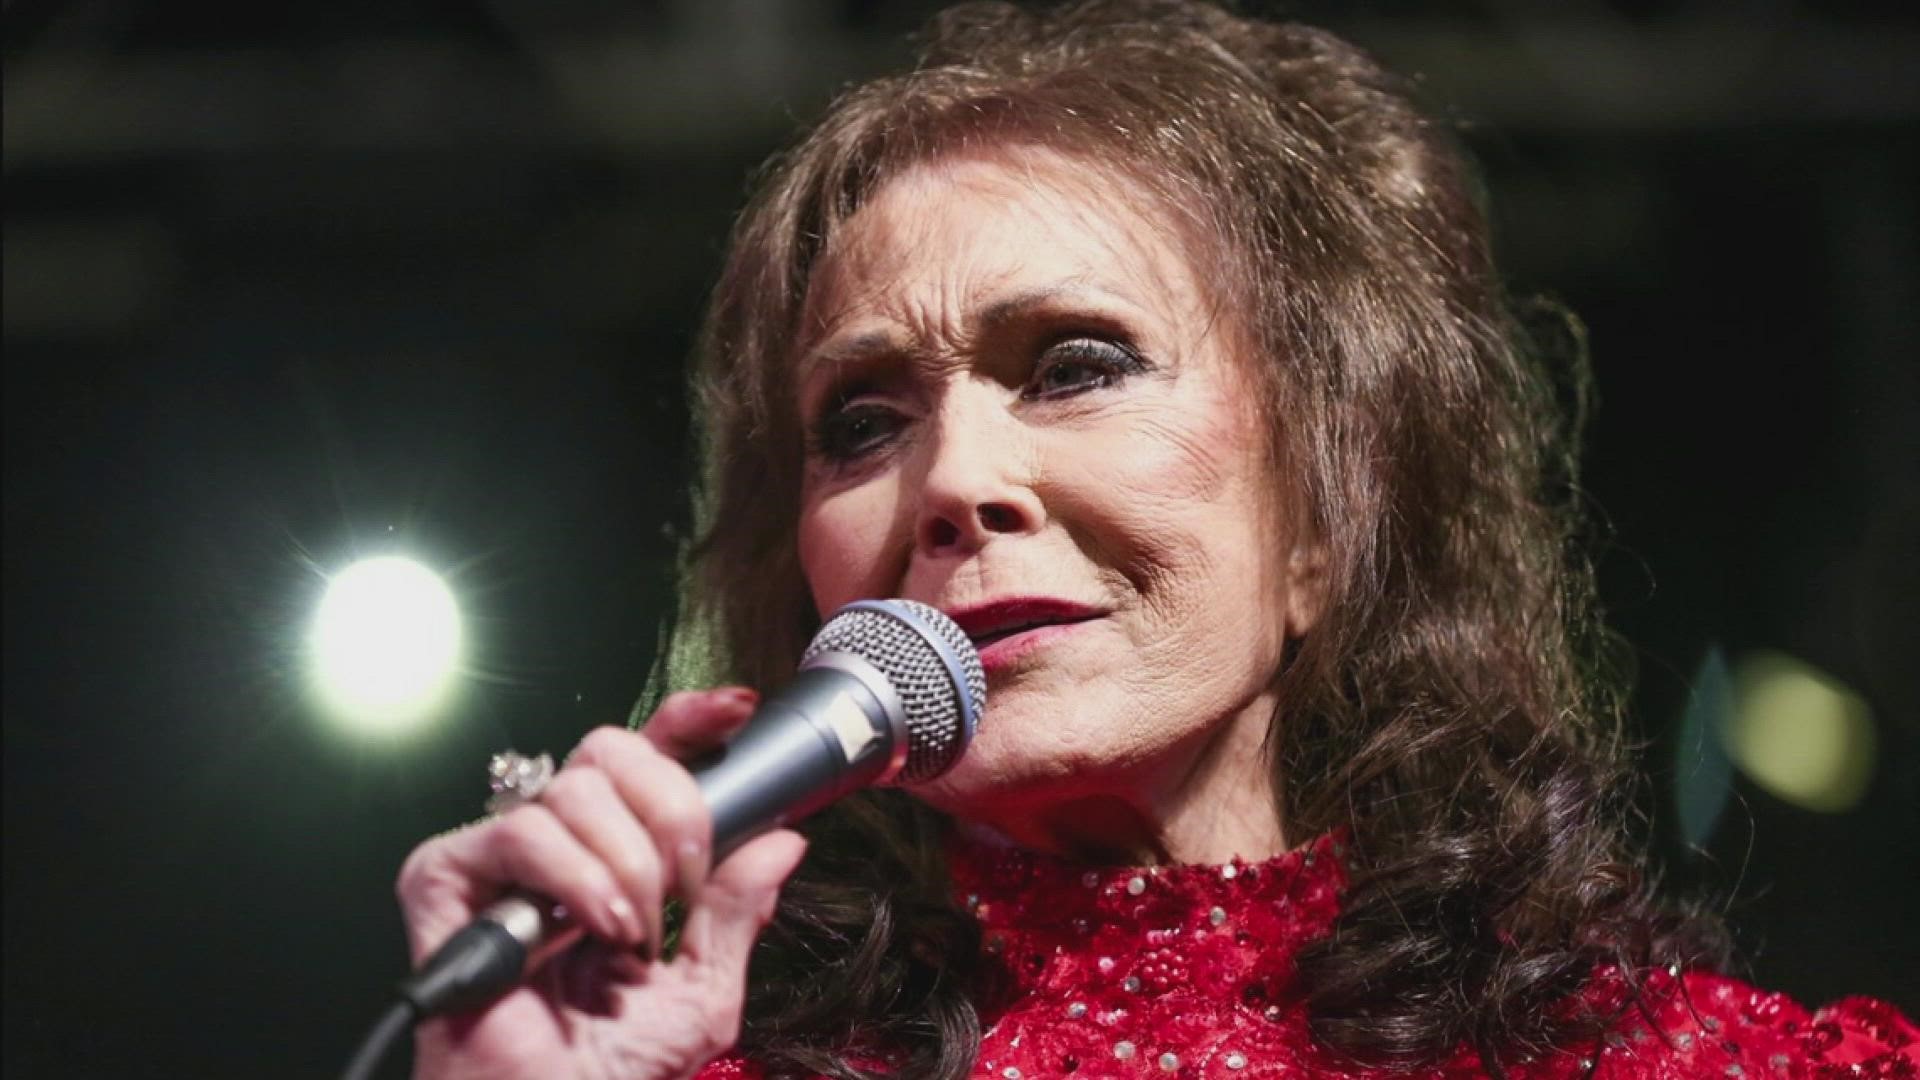 Loretta Lynn was a legend who rose from poverty to stardom -- a plain-spoken singer whose music reflected what was actually happening in her life.